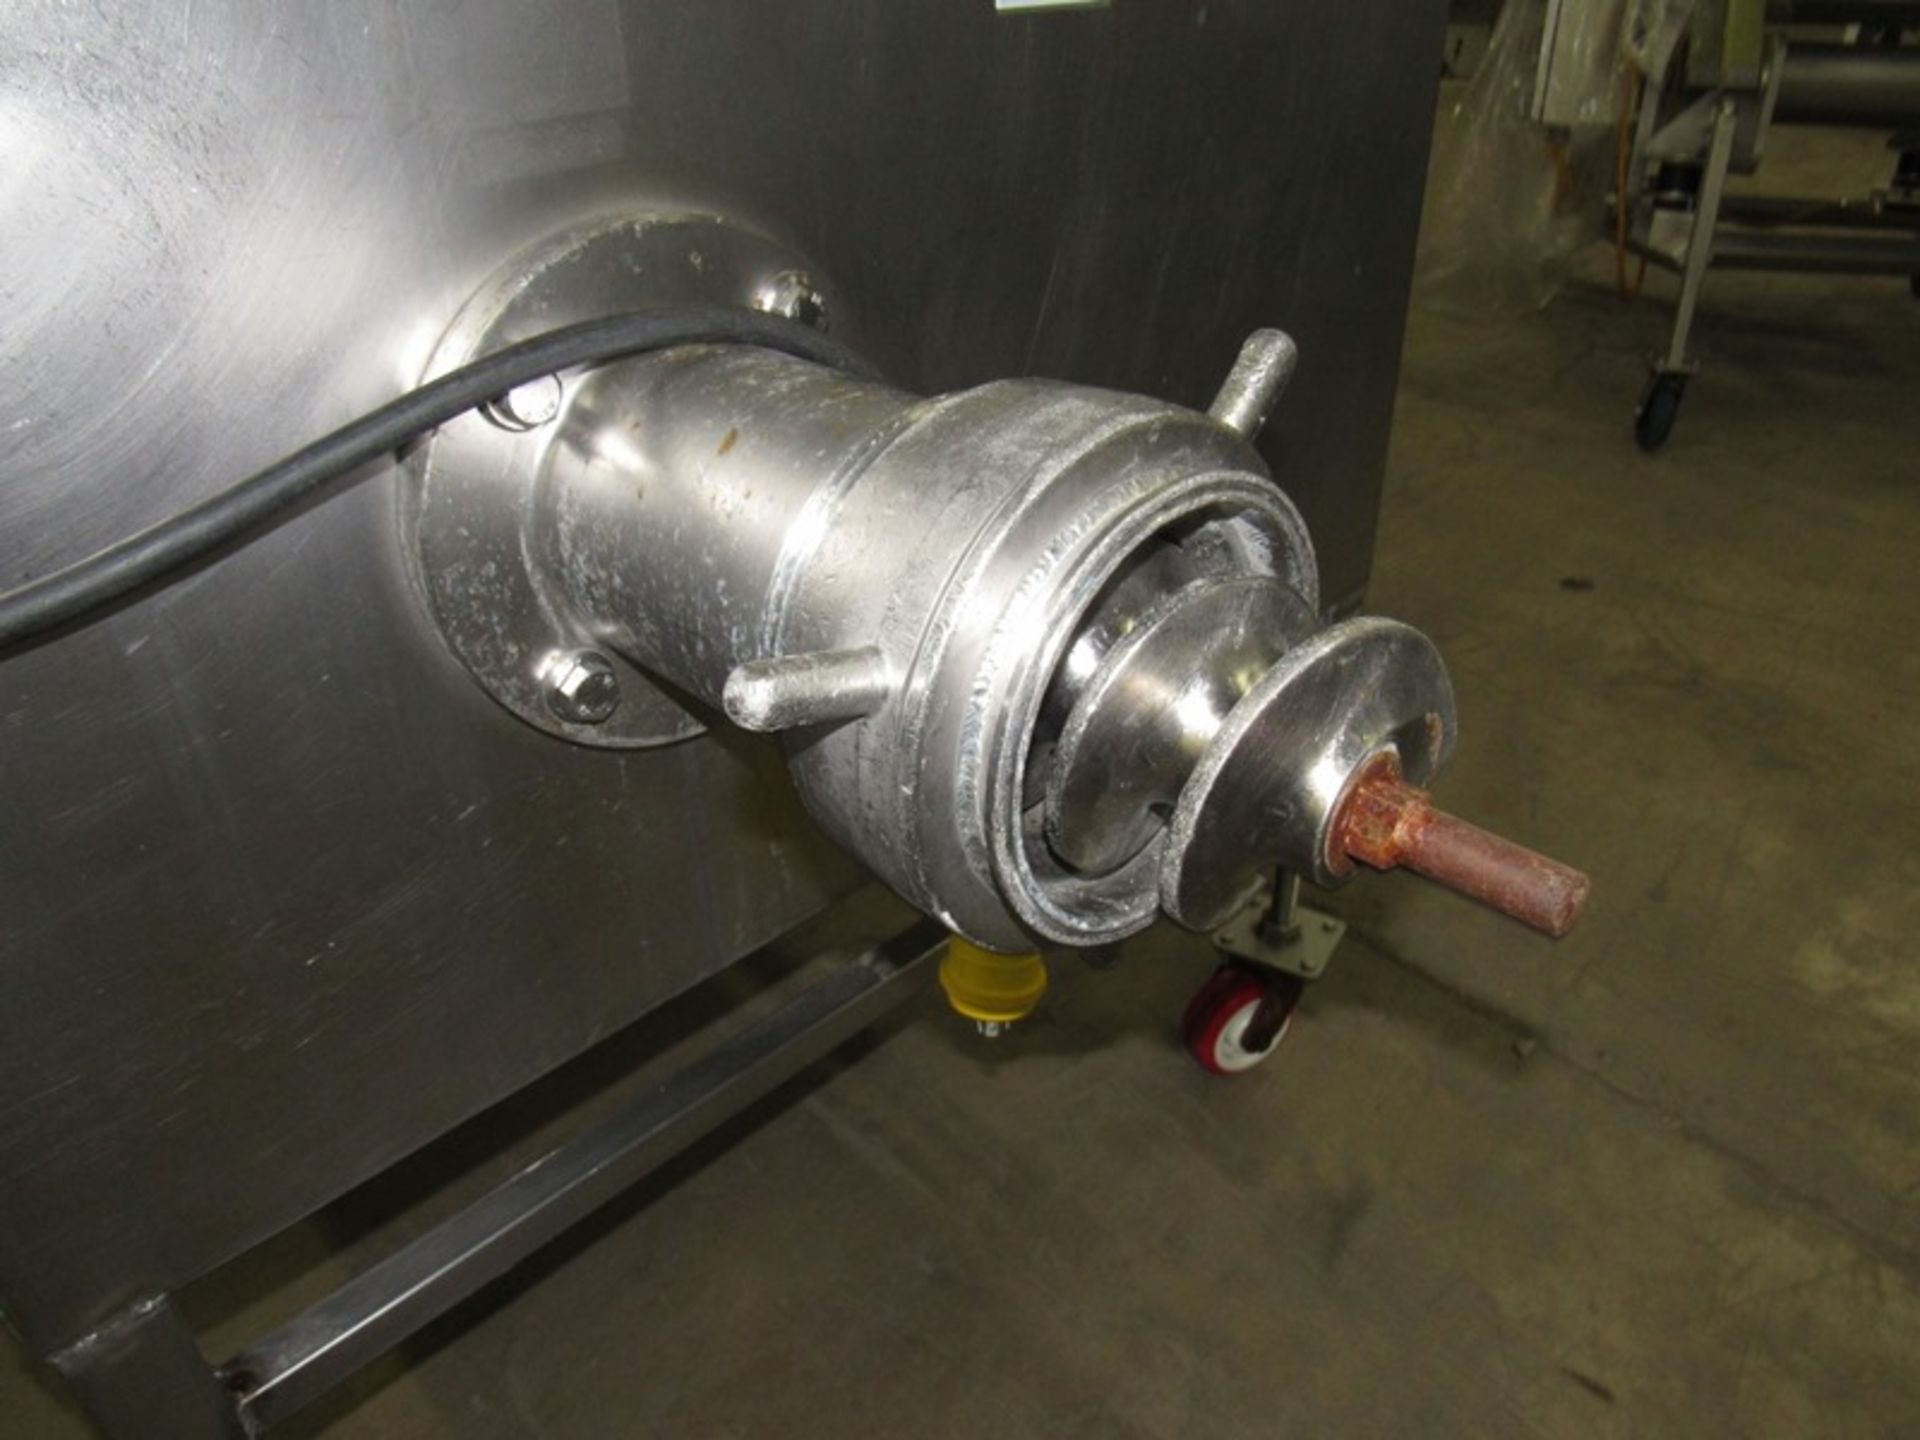 Hollymatic Stainless Steel Mixer/Grinder, 20" W X 29" L X 22" D hopper, 5" Dia. barrel, on wheels " - Image 4 of 6